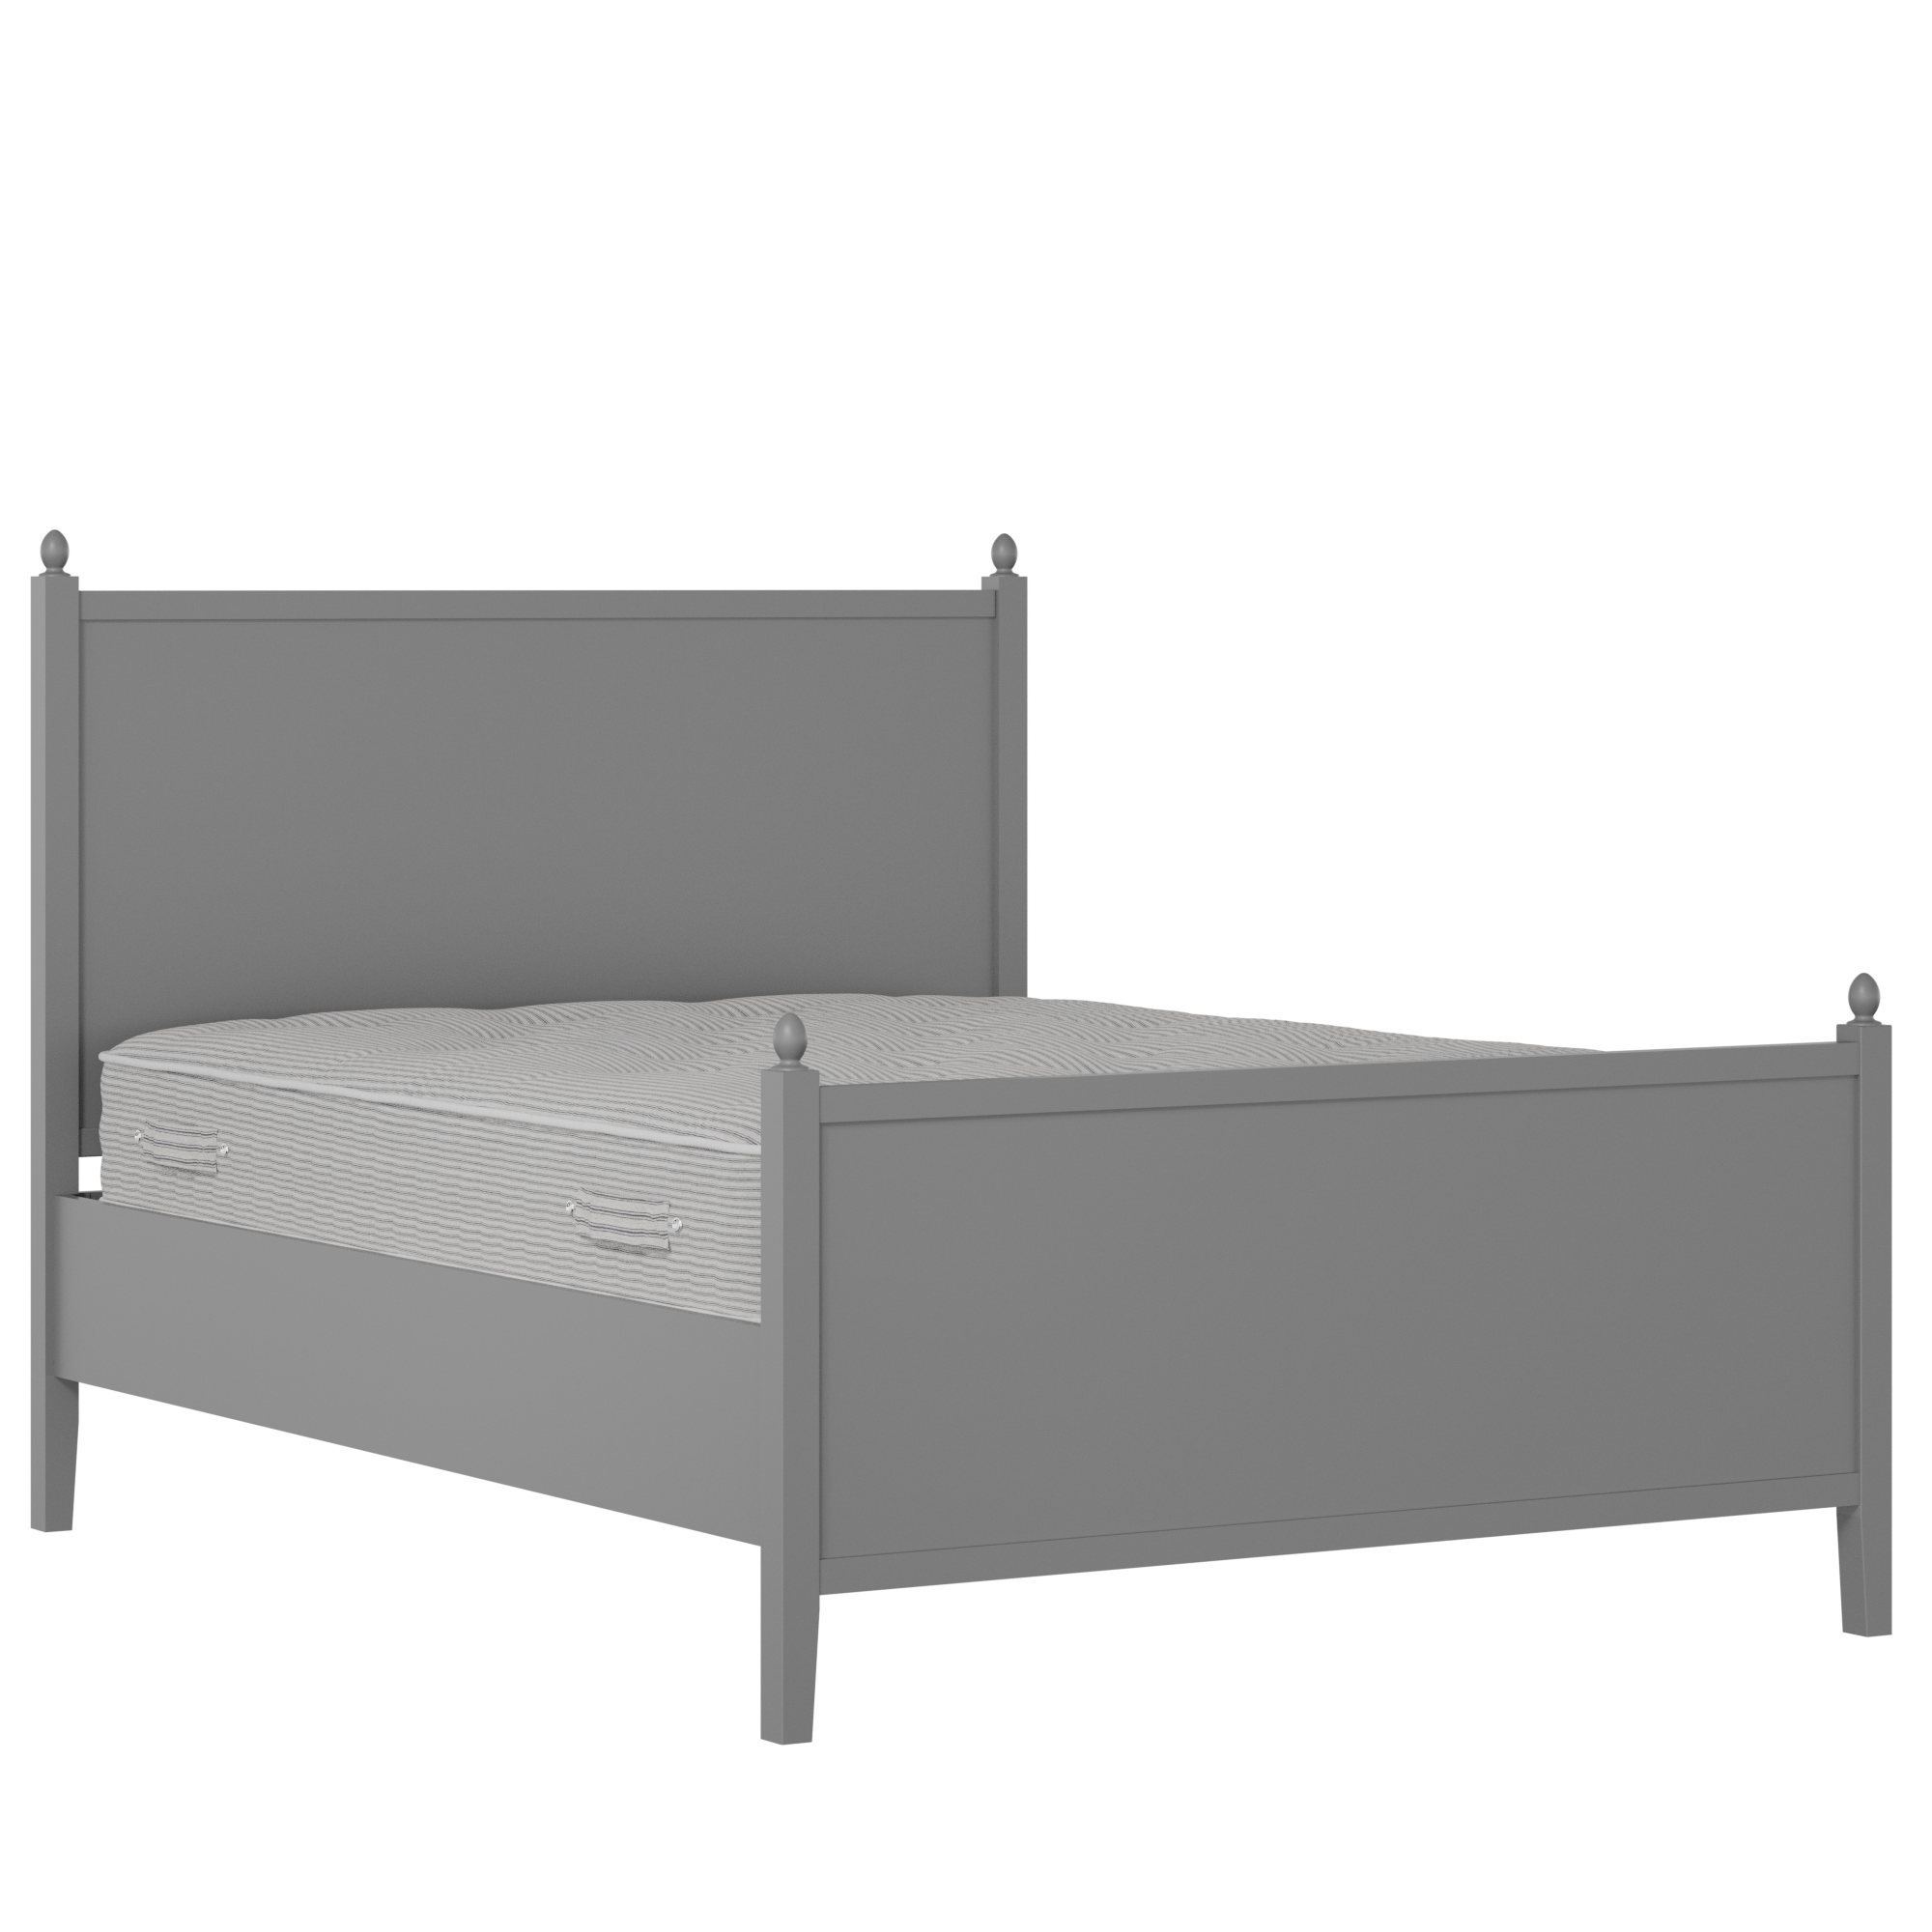 Marbella Painted painted wood bed in grey with Juno mattress